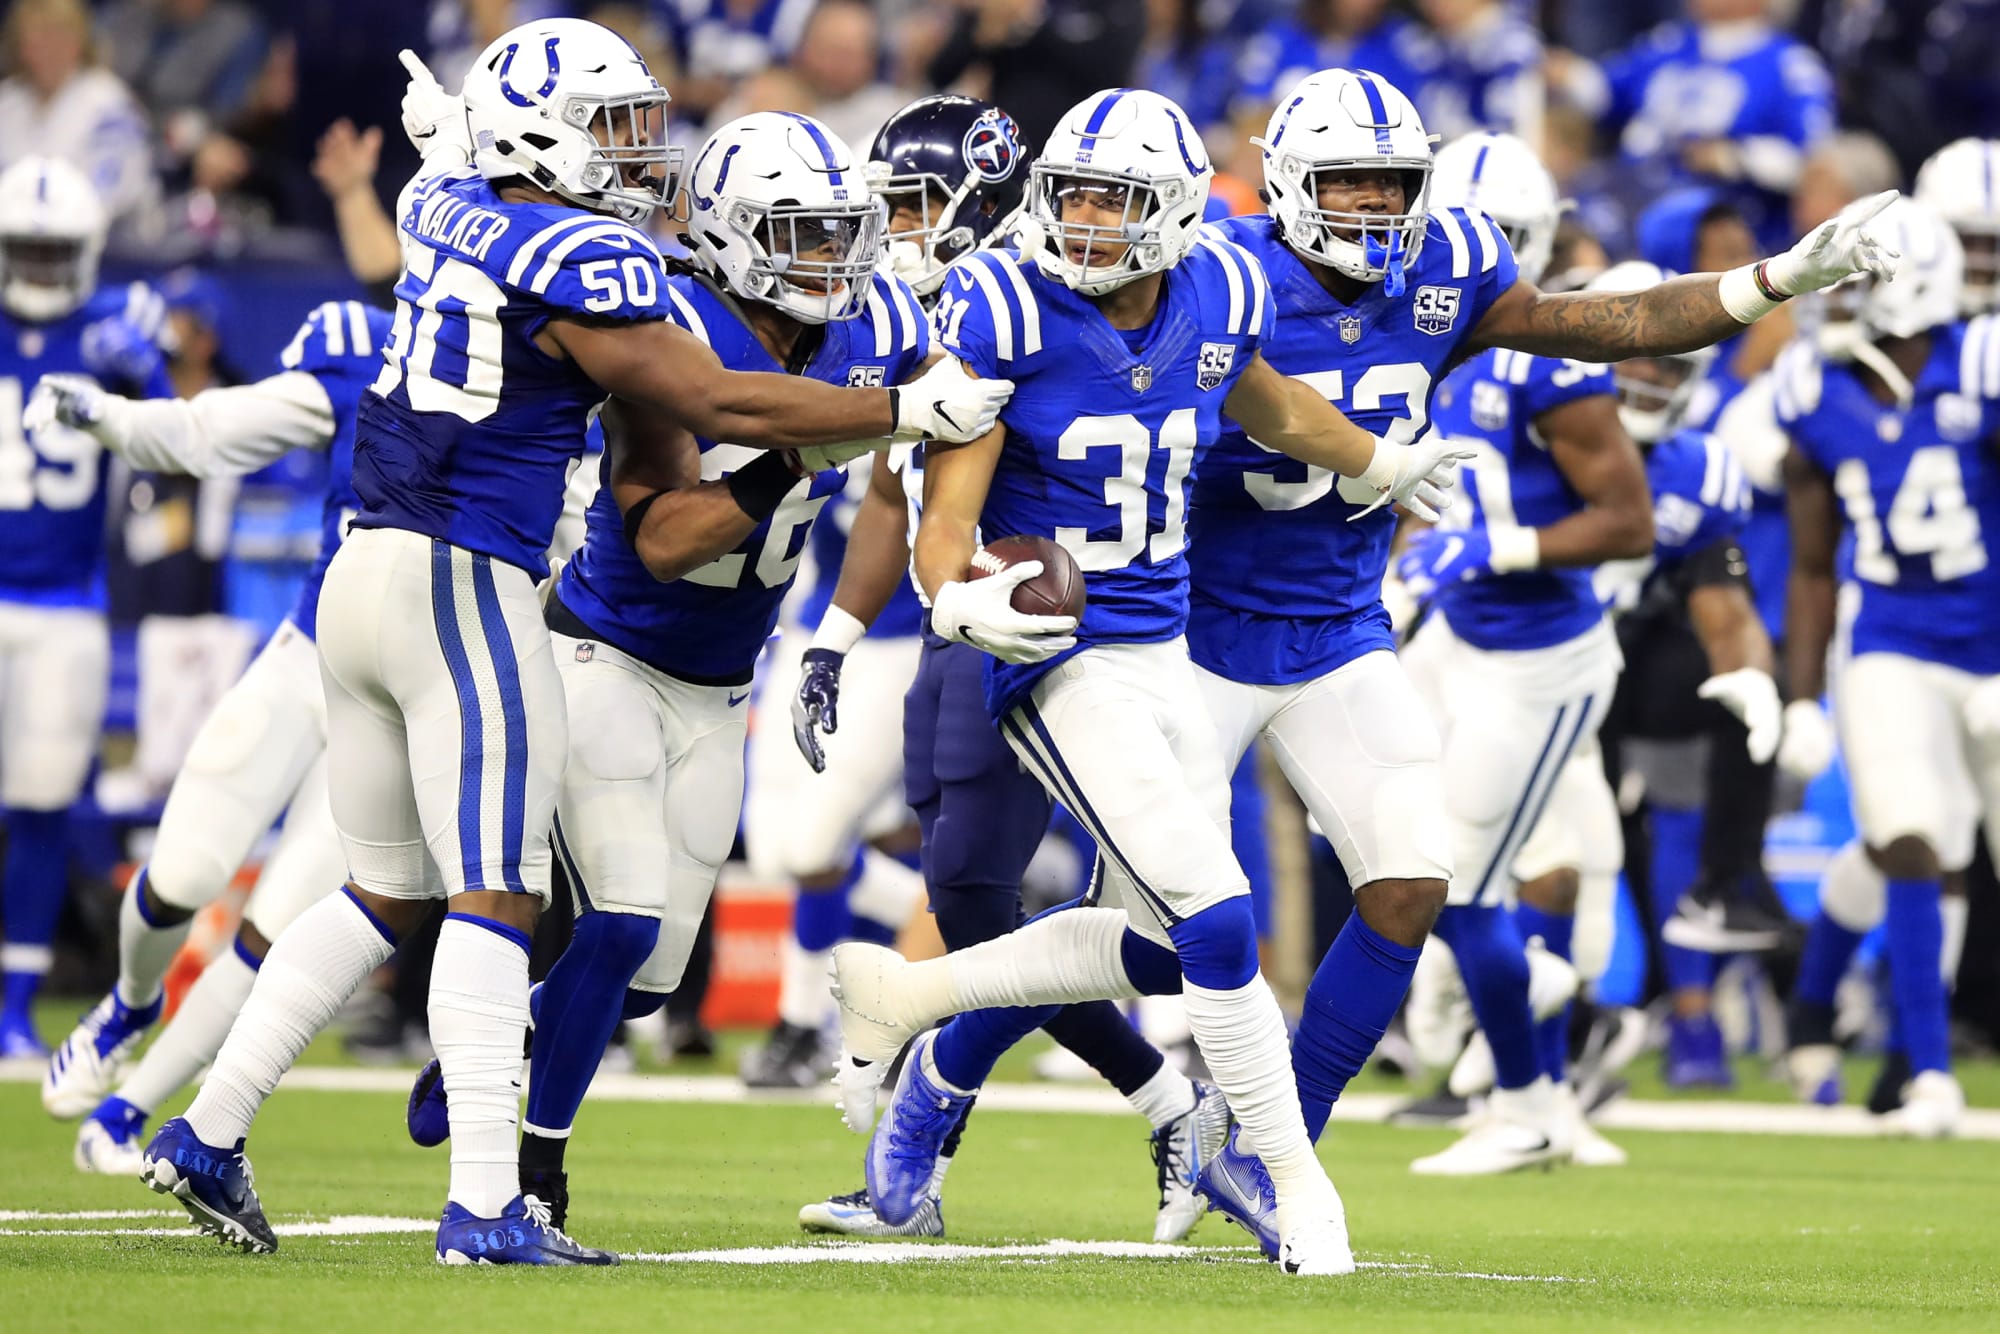 Which Games Will the Indianapolis Colts Win to Close the Season?